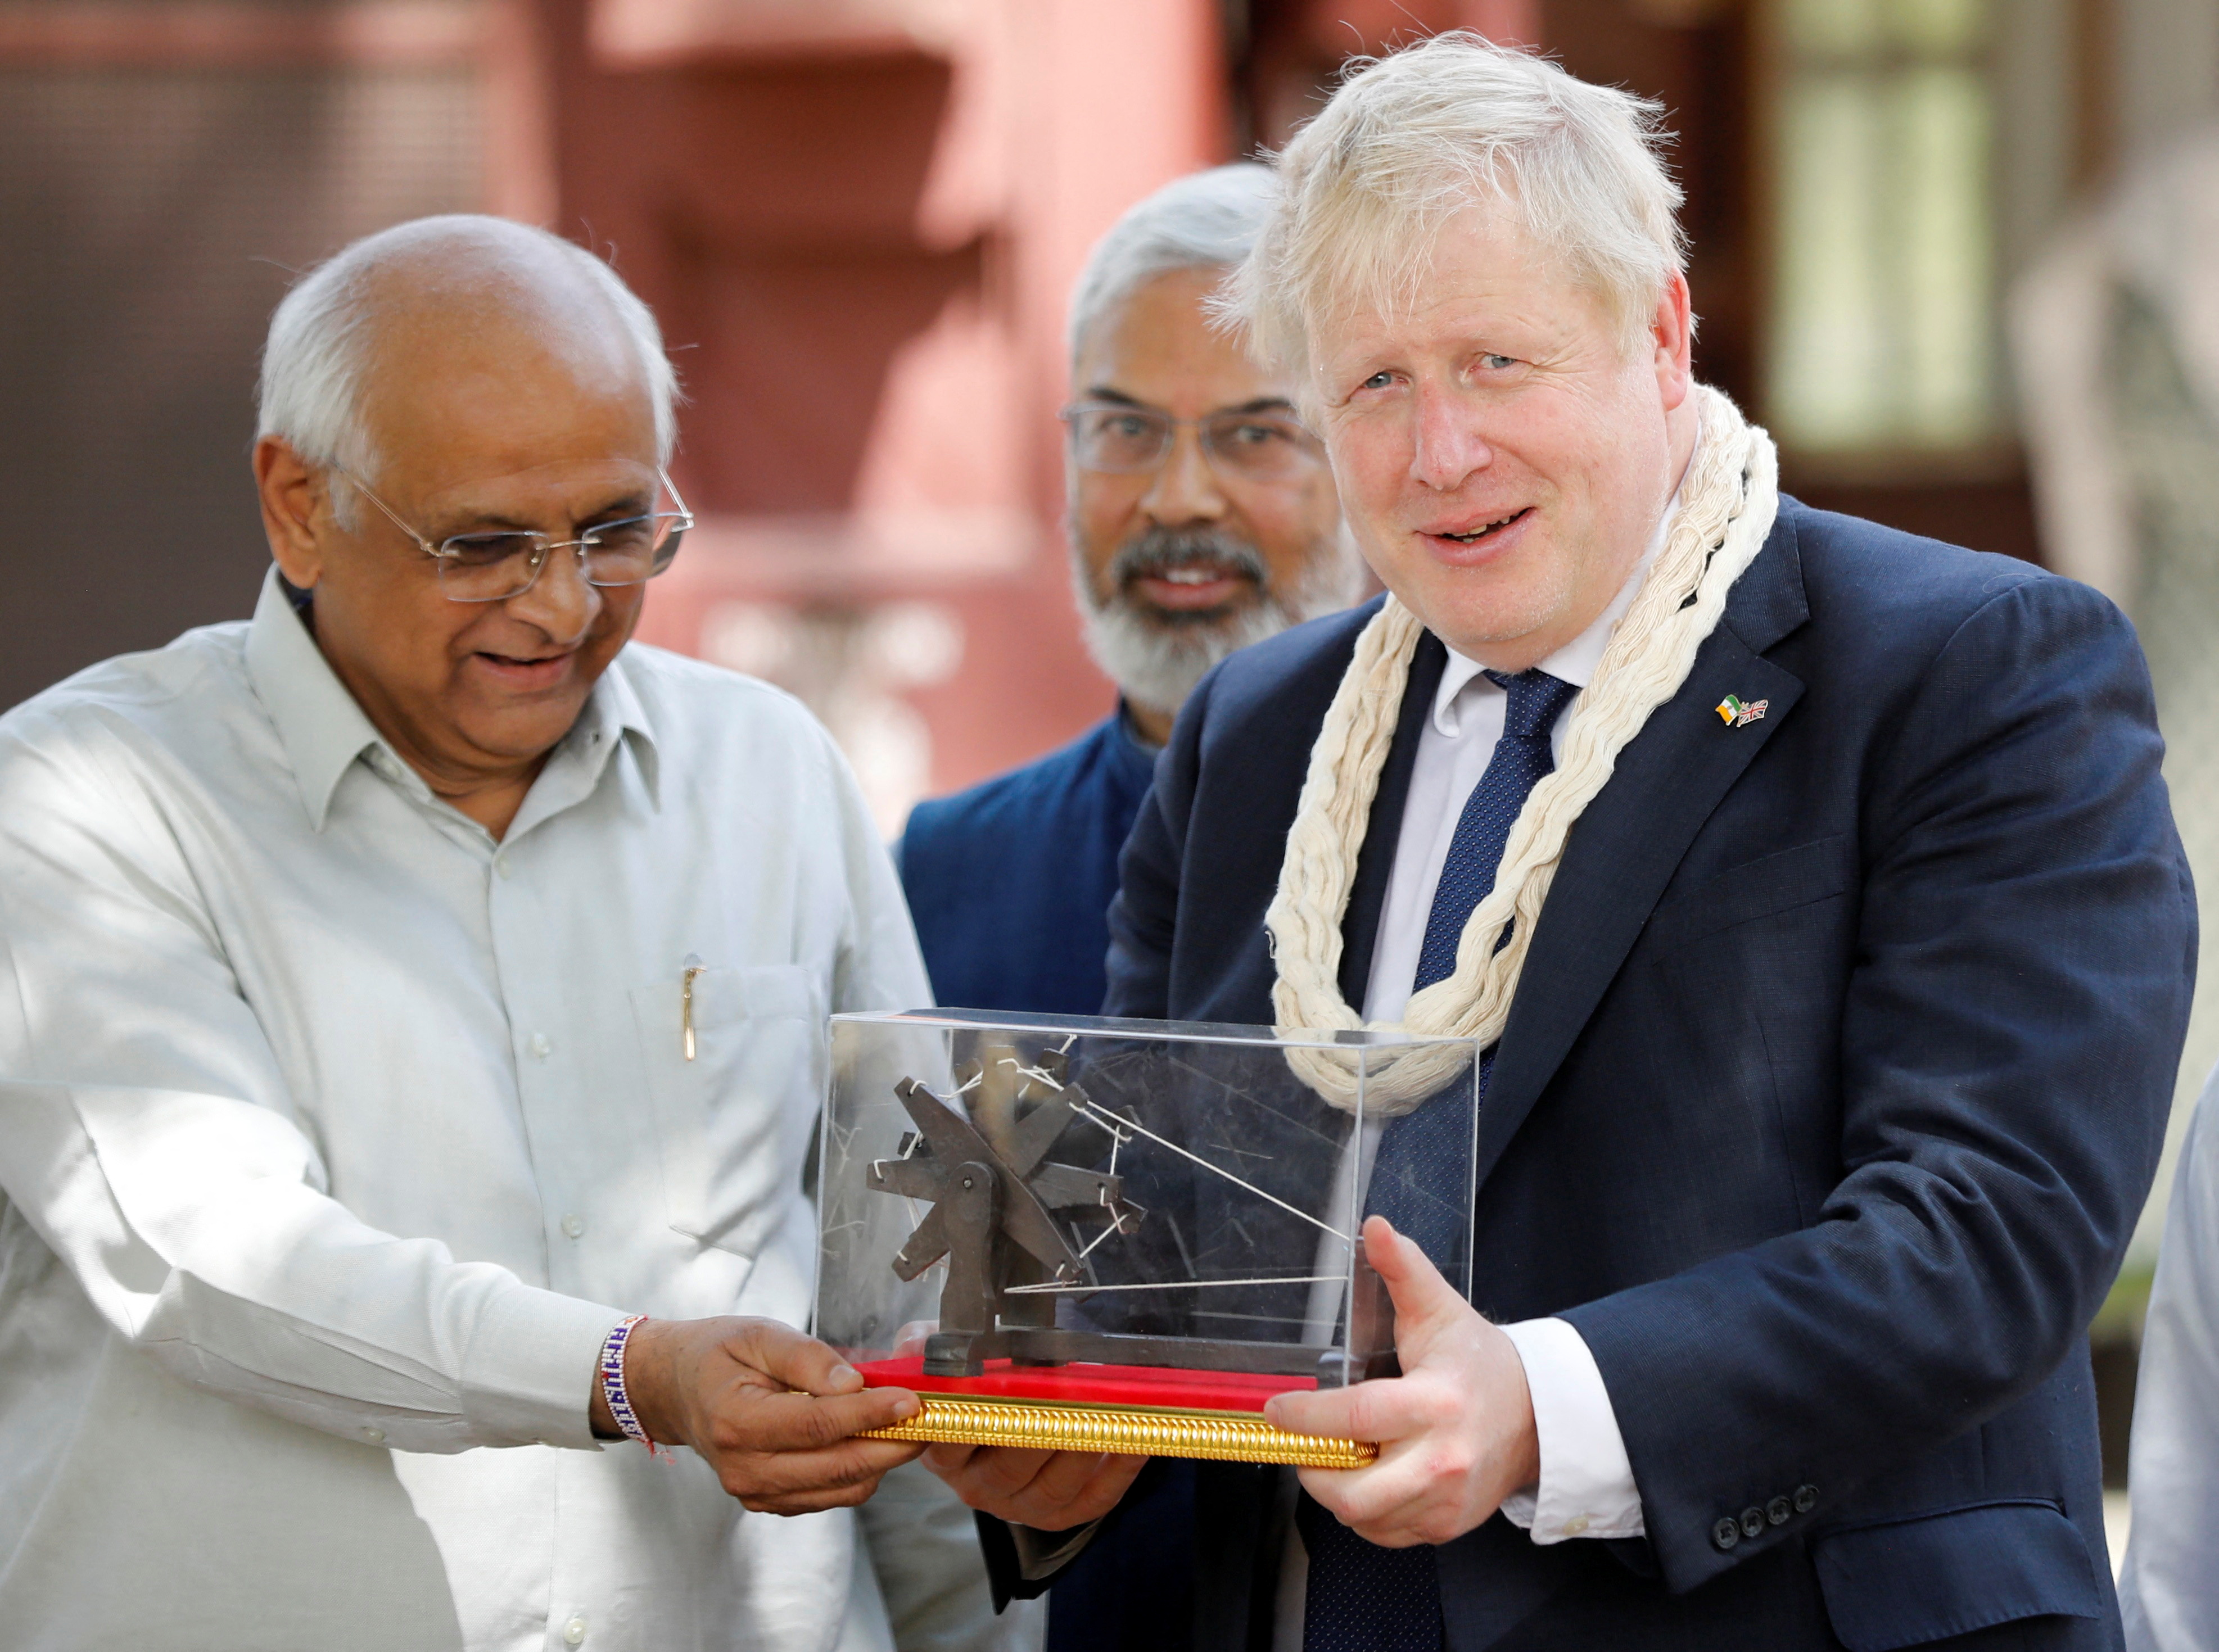 Boris Johnson visit: UK, India to sign several pacts; defence, more visas, lower duties on agenda